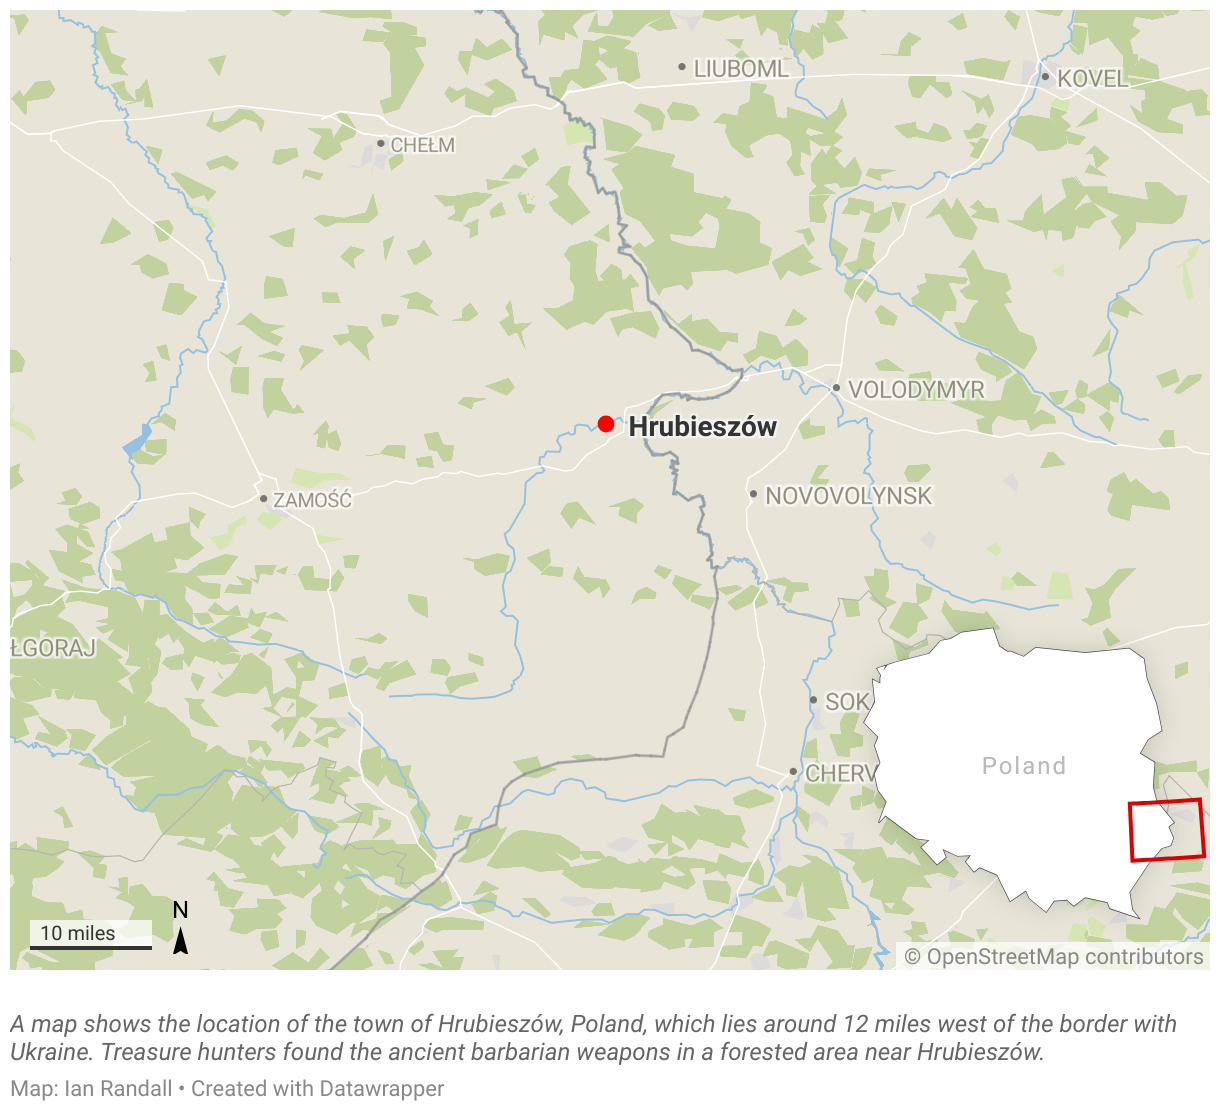 A map shows the location of the town of Hrubieszów, Poland, which lies around 12 miles west of the border with Ukraine.